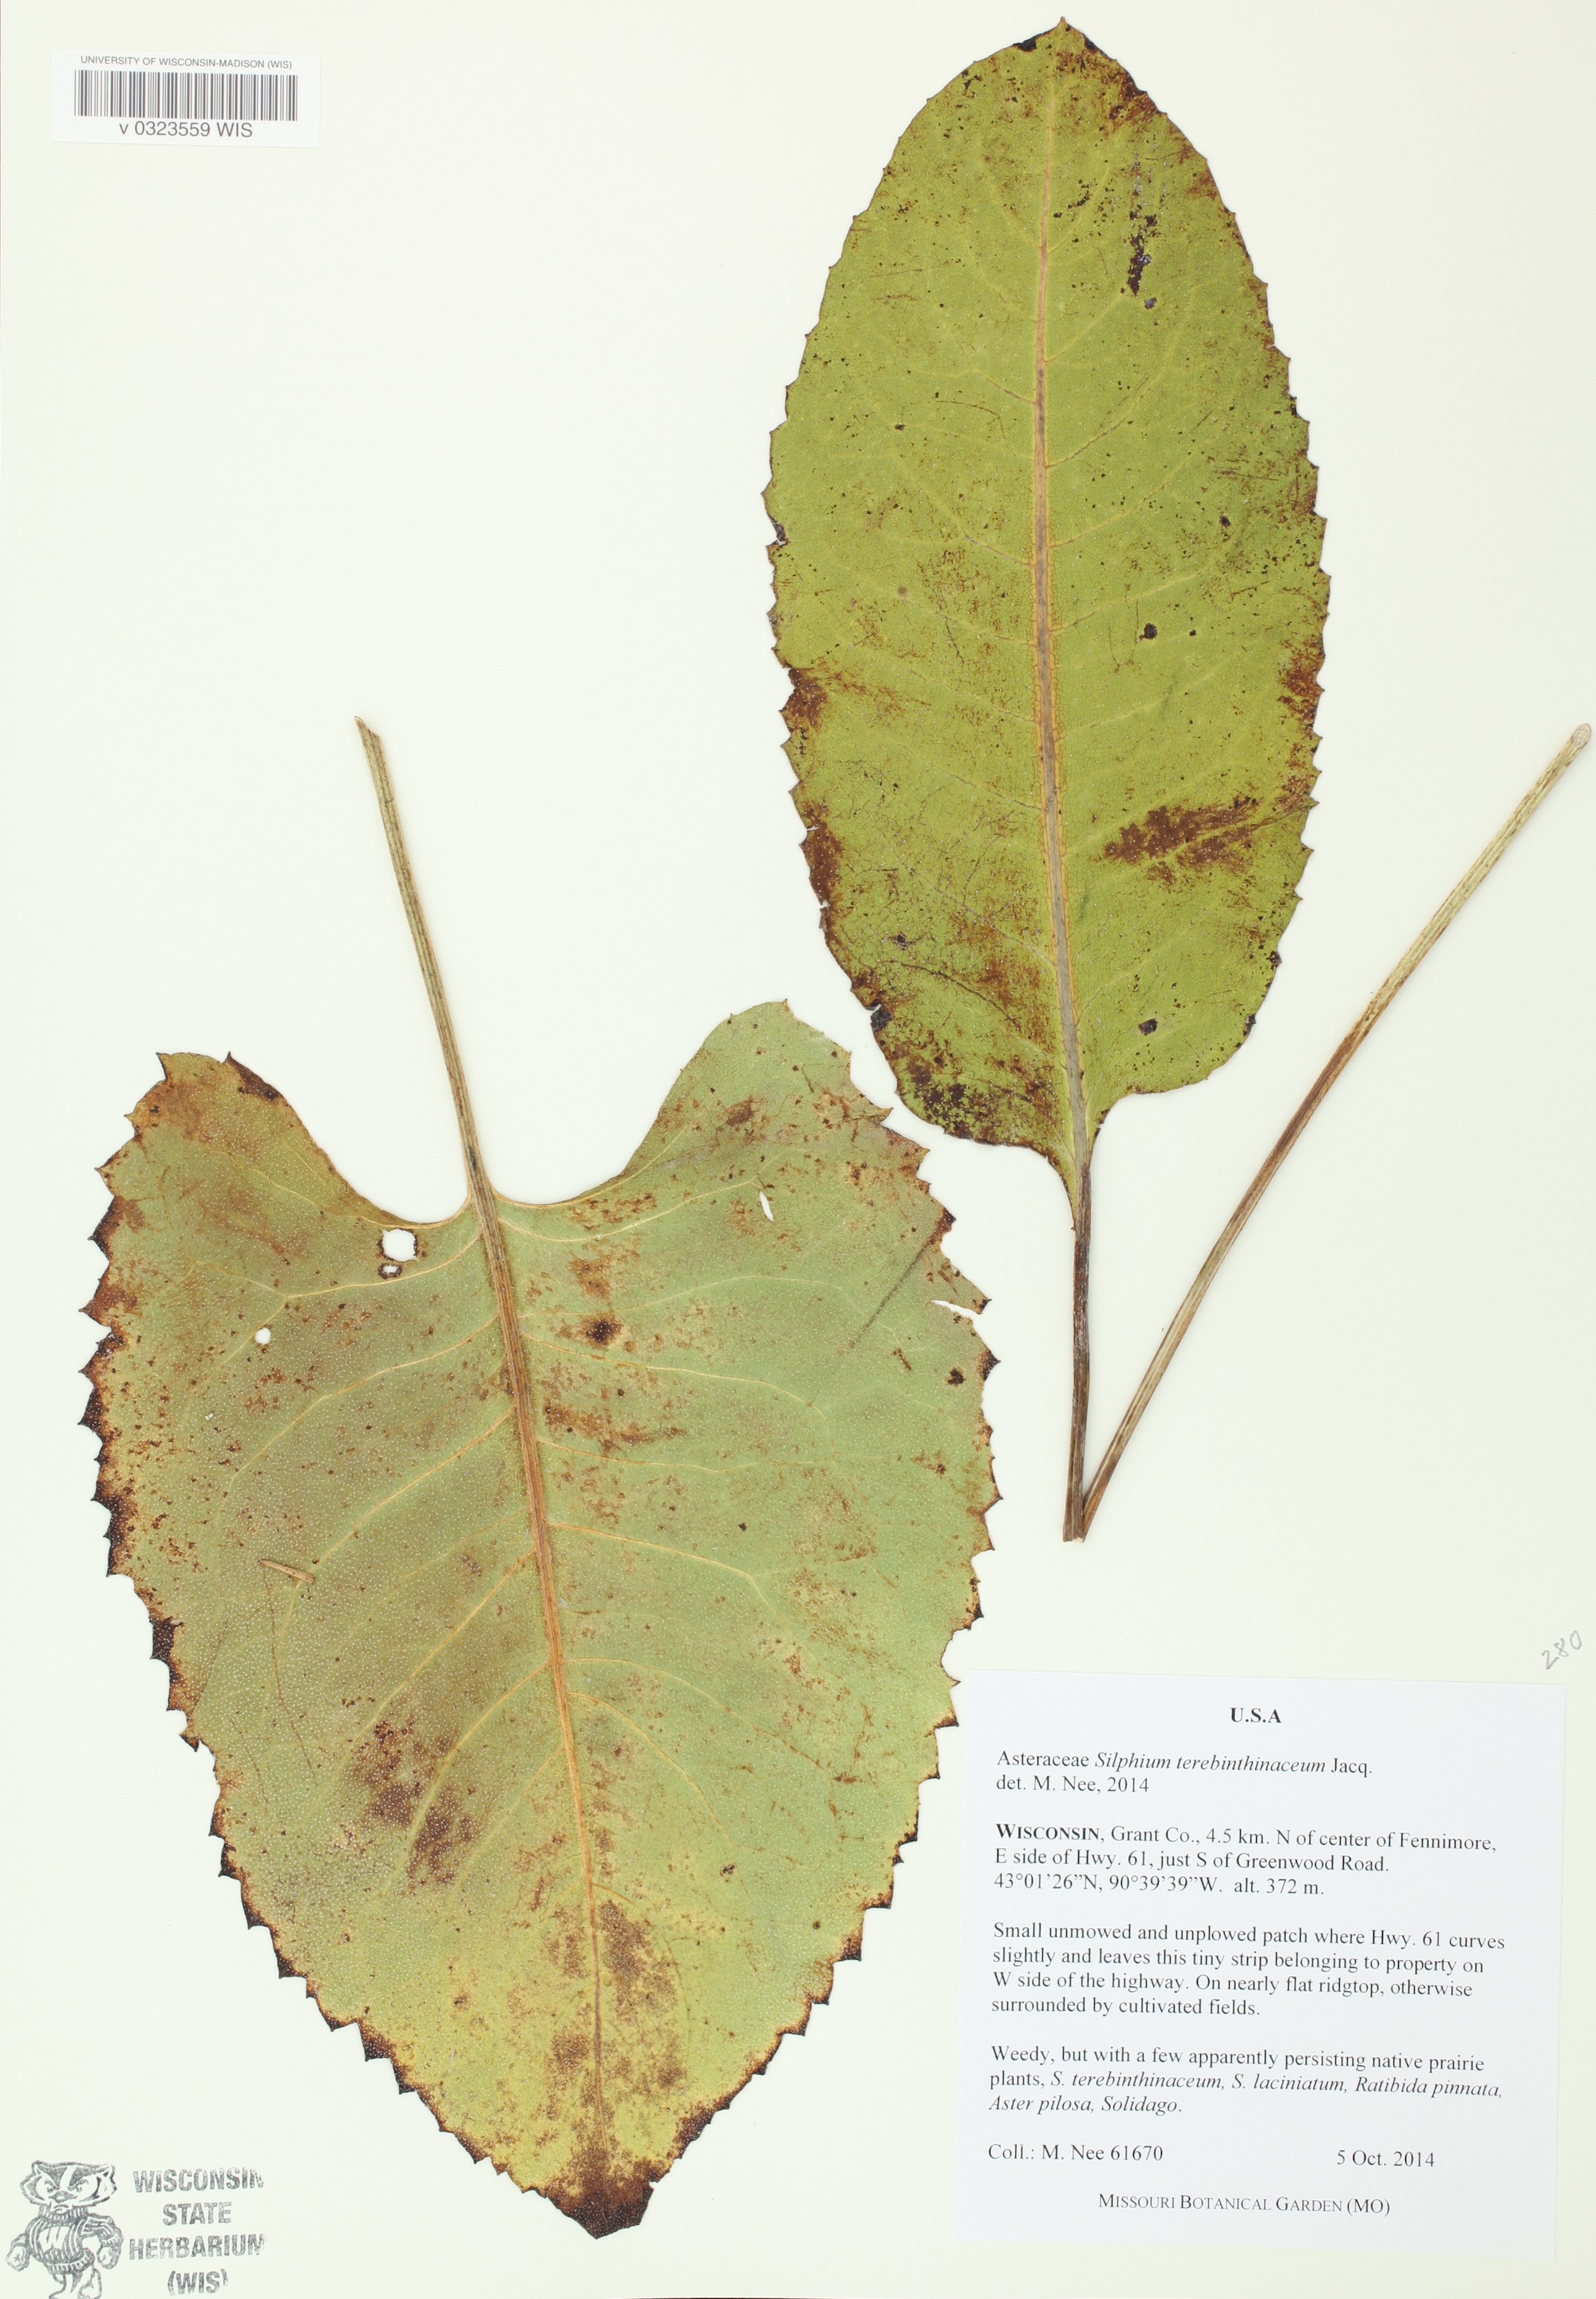 Basal-leaved Rosinweed specimen collected in Grant County on October 5, 2014.